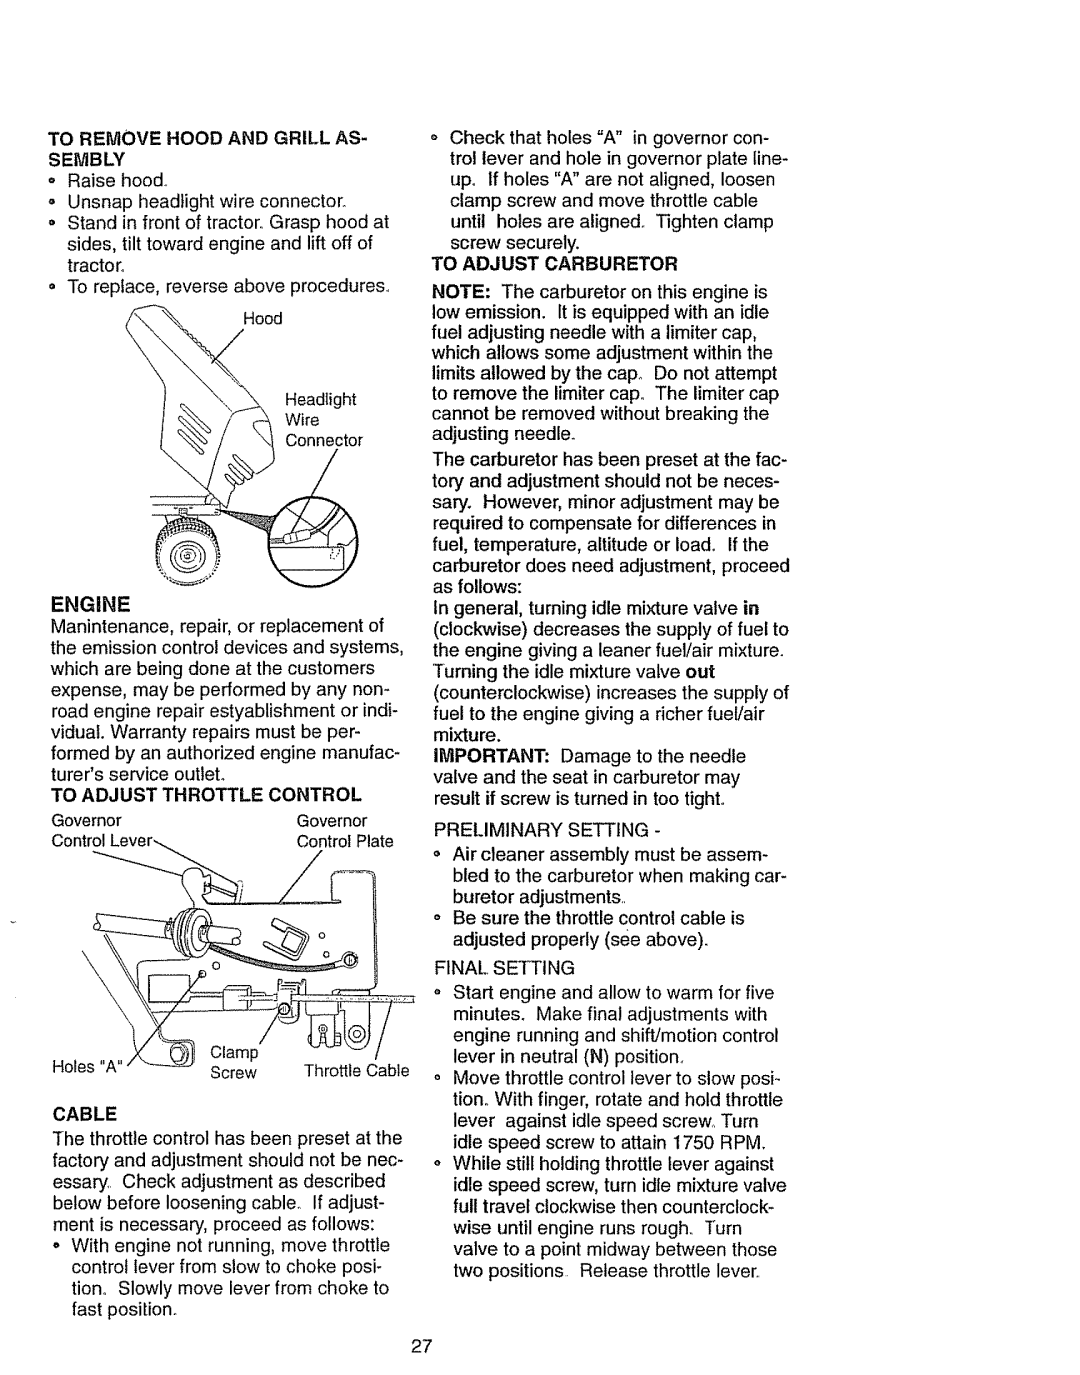 Craftsman 917270841 owner manual To Remove Hood And Grill As, Engine 